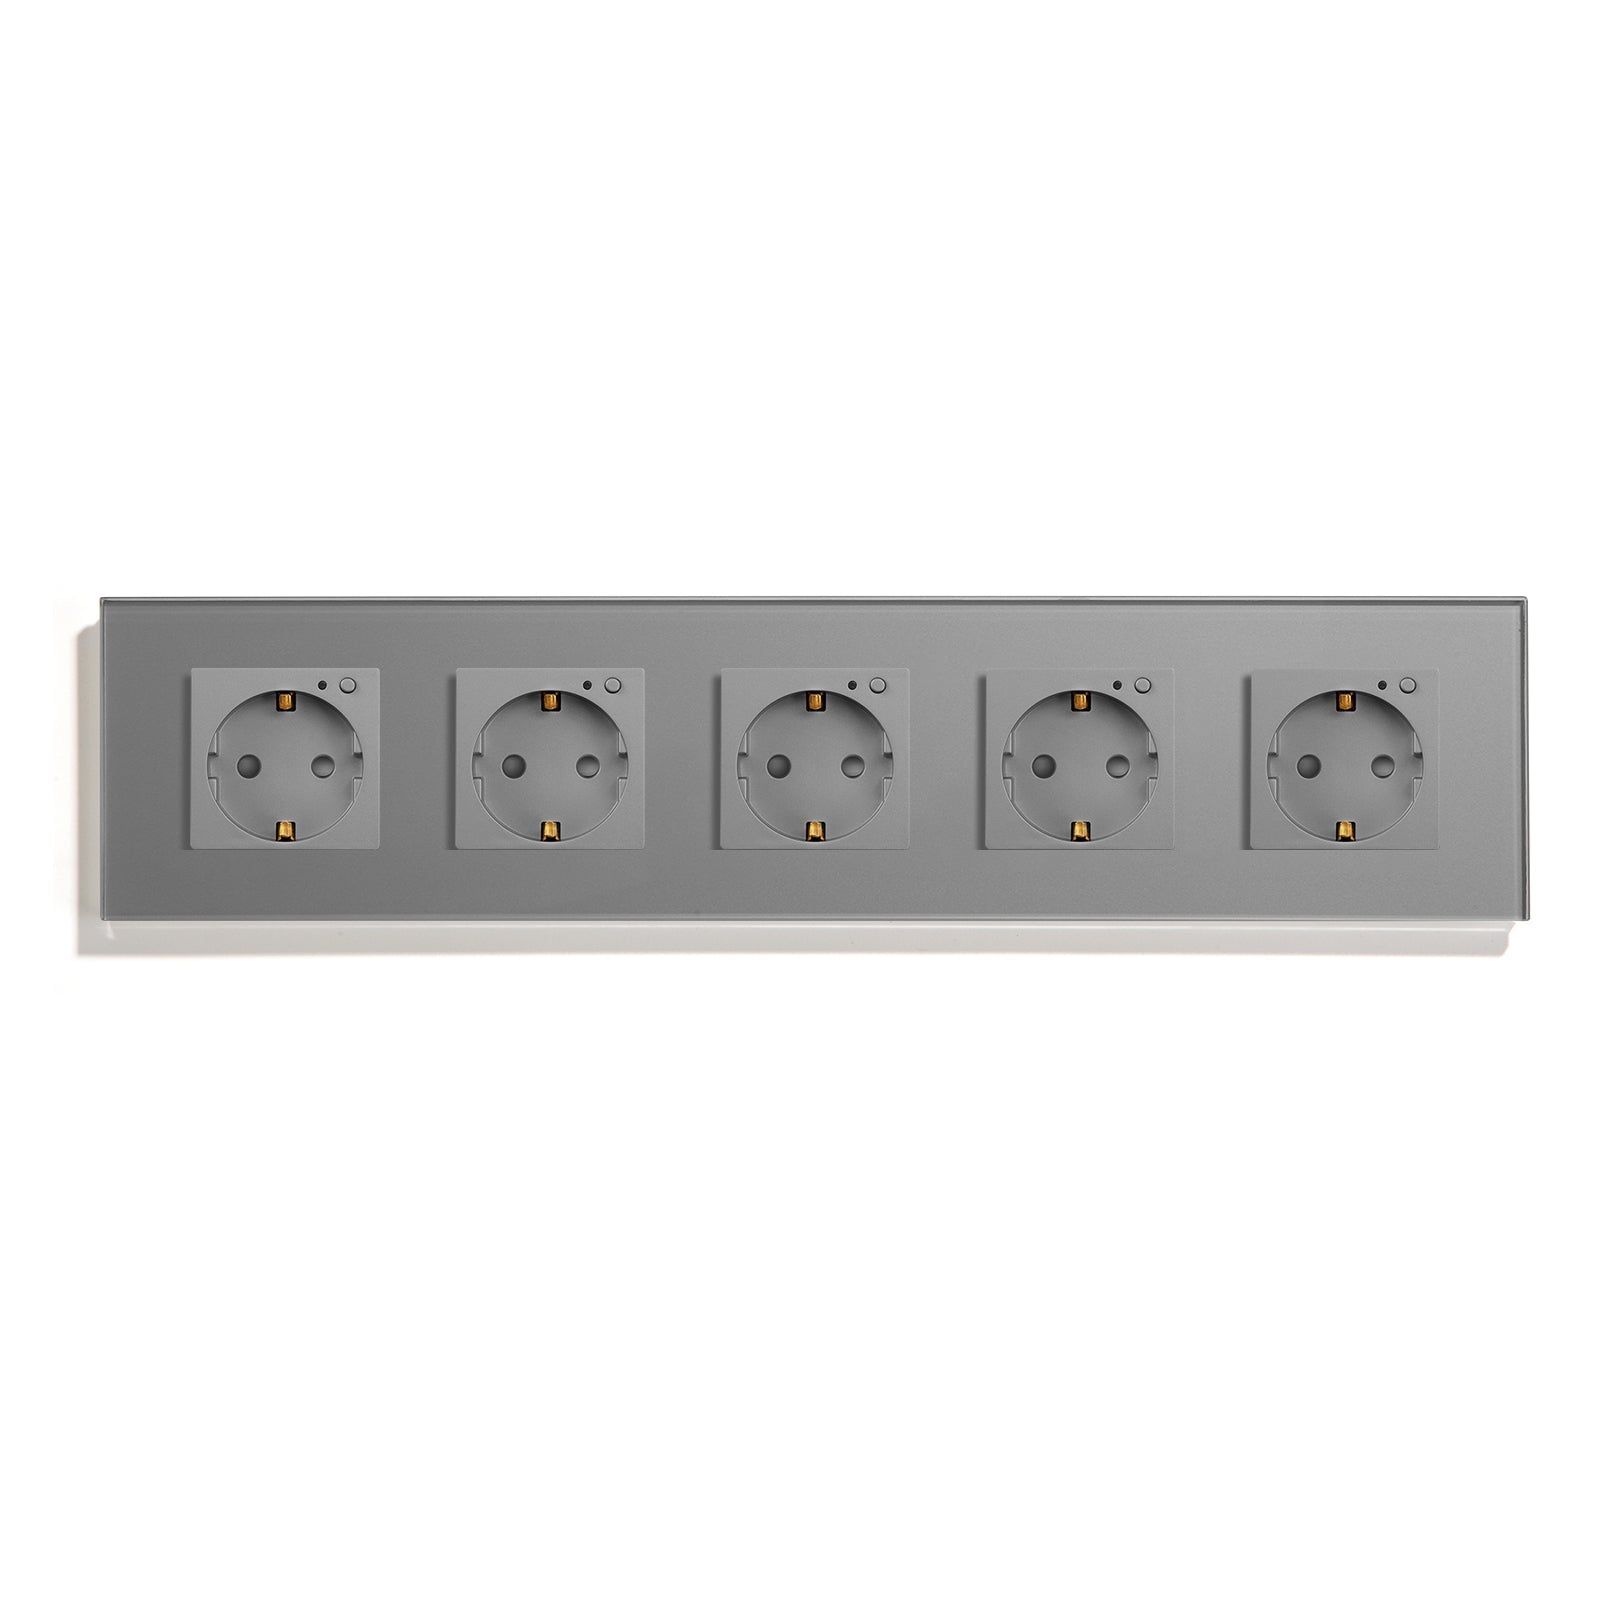 BSEED Wifi EU Wall Sockets Single Power Outlets Kids Protection Wall Plates & Covers Bseedswitch grey Quintuple 